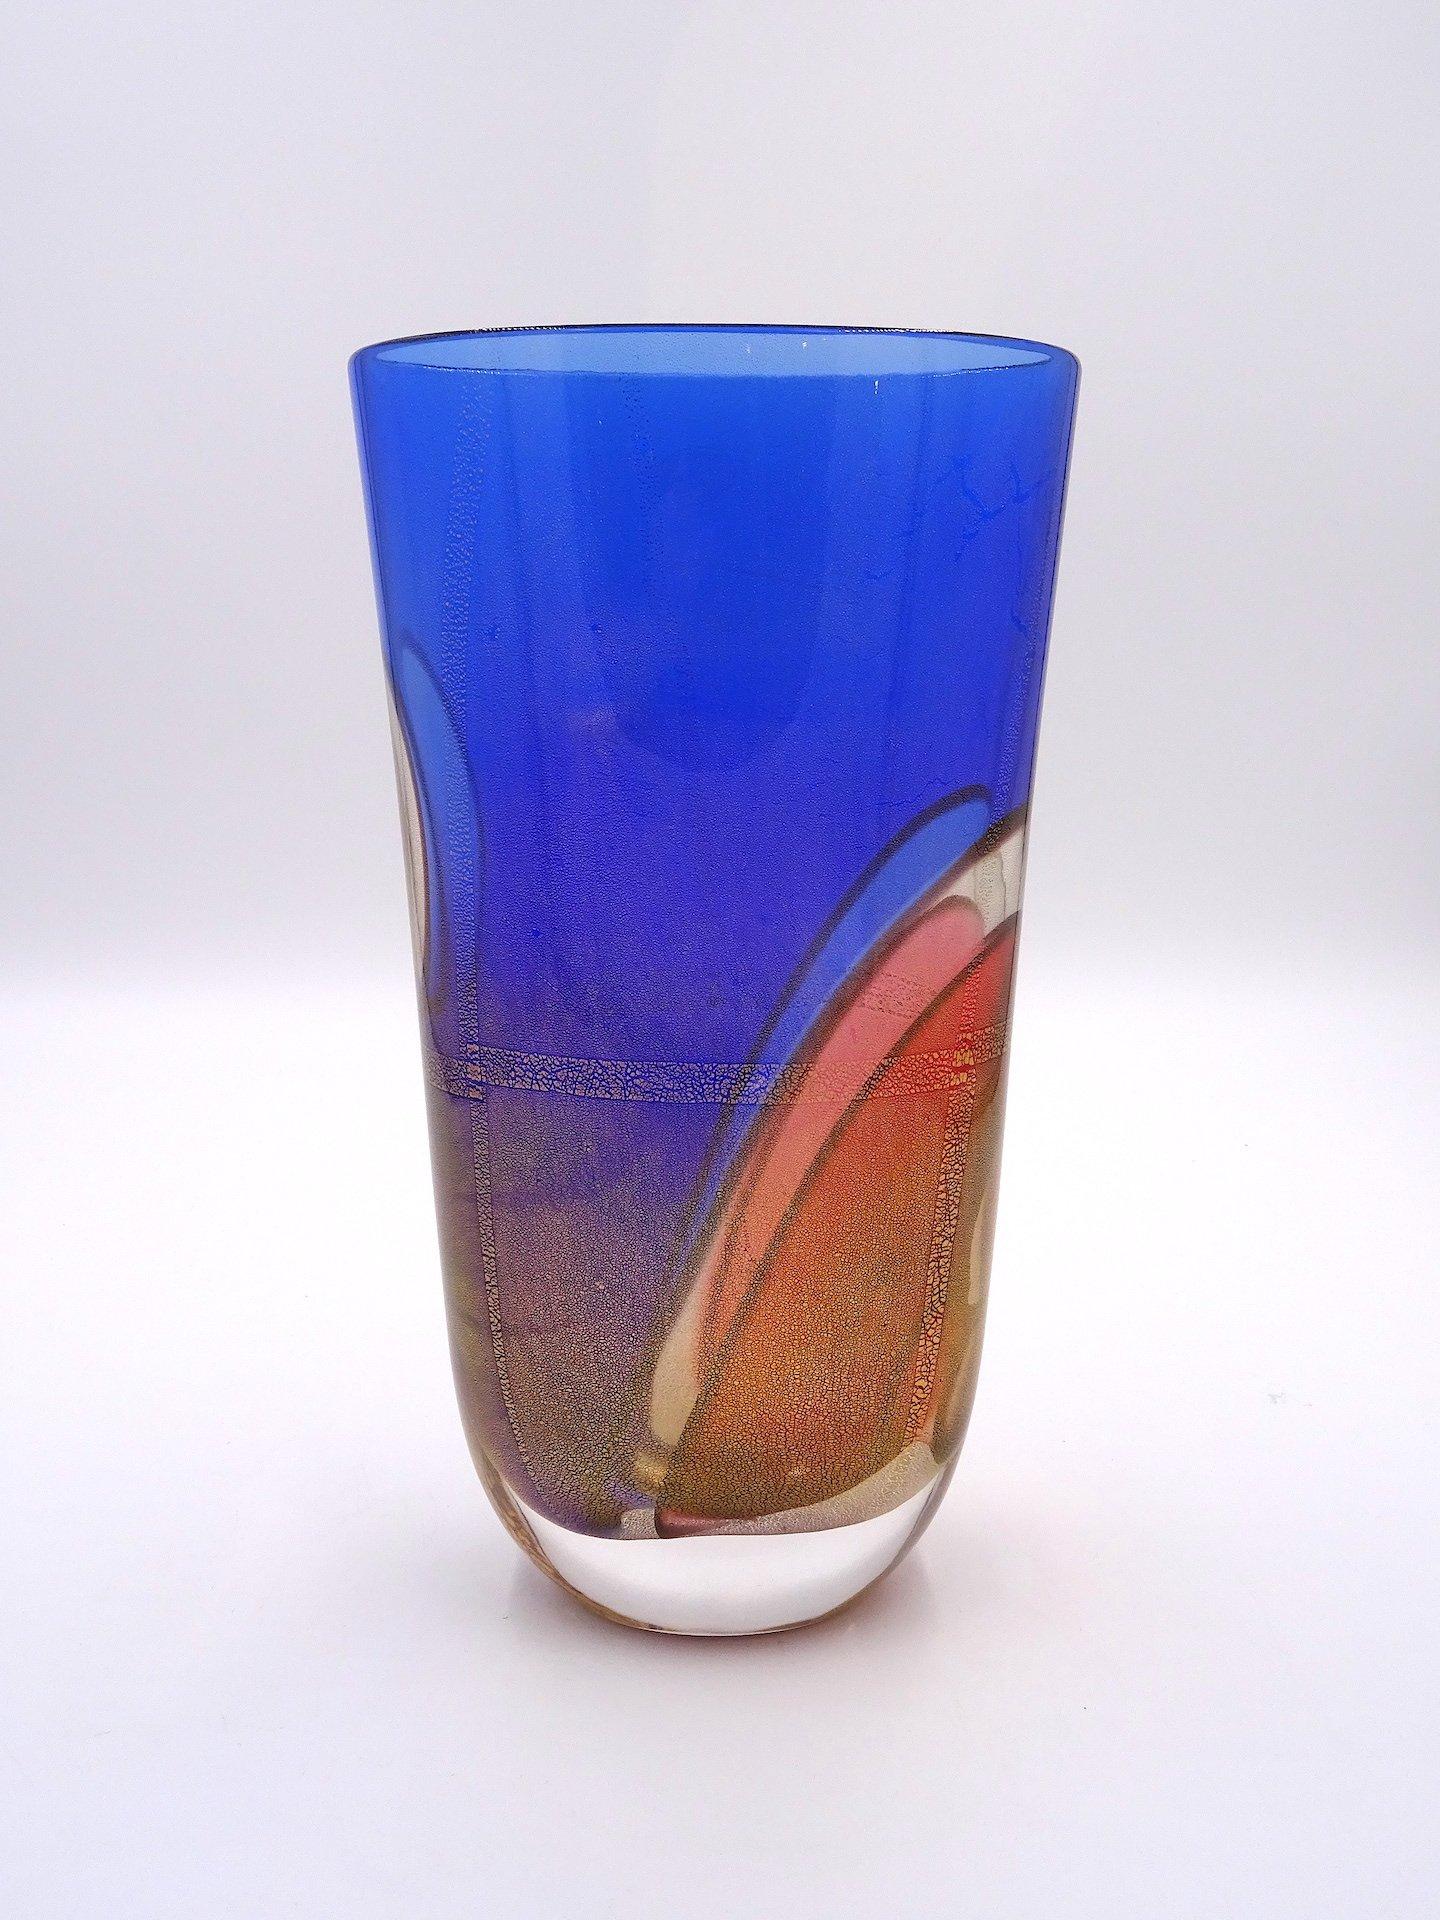 Carnival Collection Murano Glass Vase by Archimede Seguso for Seguso, 1980's For Sale 5